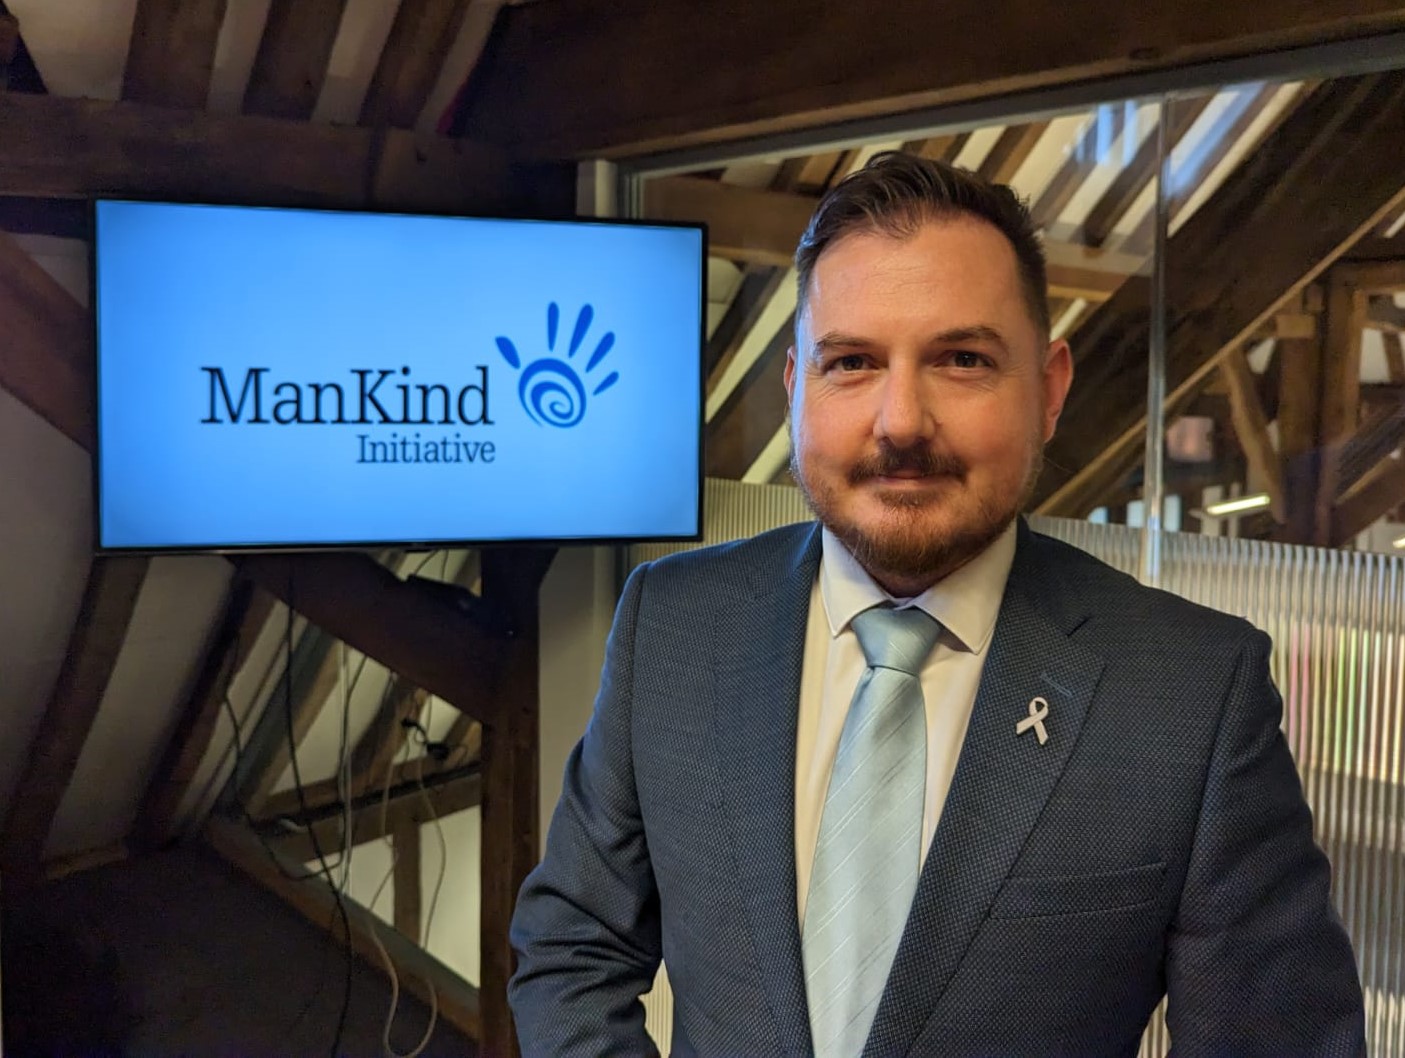 Terry Norton smiling infront of a ManKind Logo